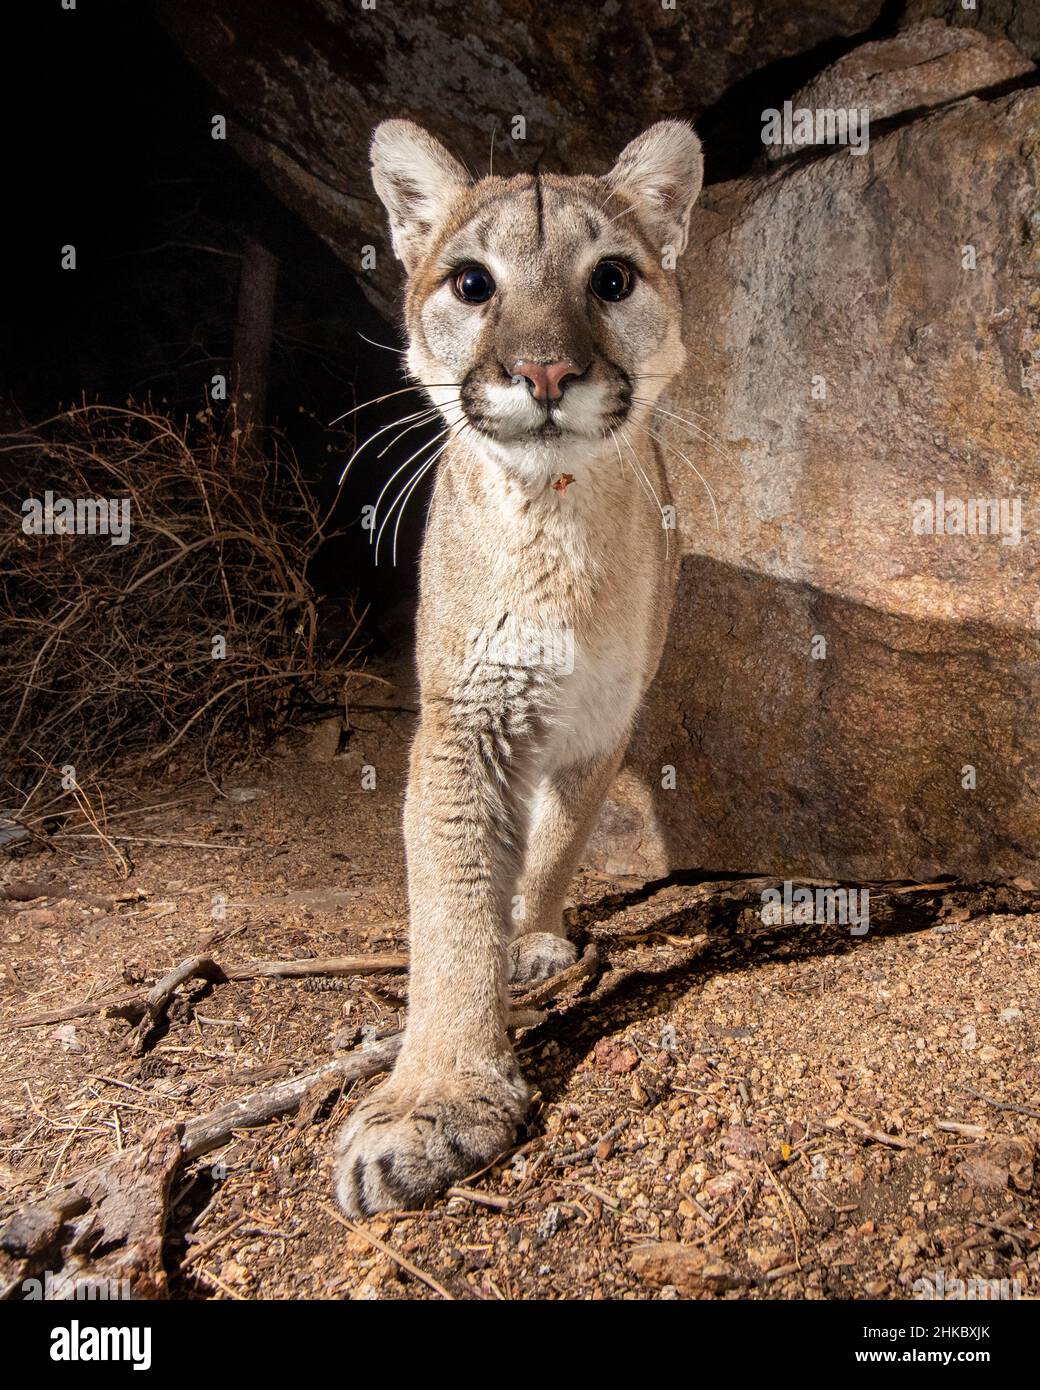 Young Colorado Mountain Lion captured with DSLR camera trap staring at camera. Stock Photo